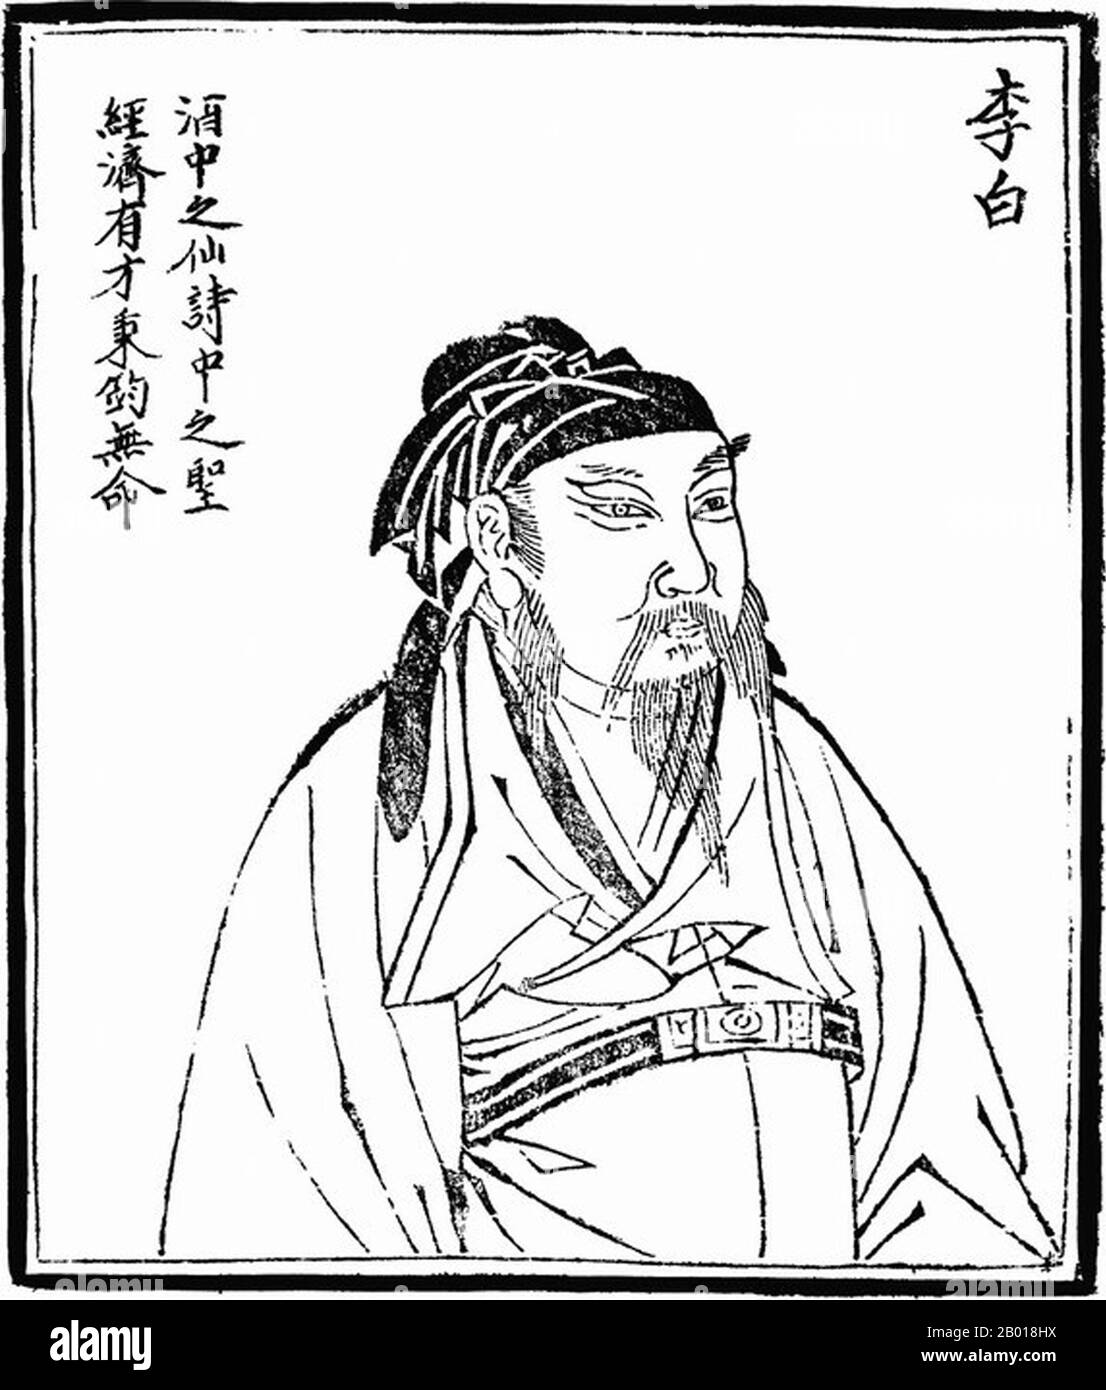 Li Bai (701-762), widely known in the West as Li Po, Chinese poet of the Tang Dynasty (618-907). Woodblock print from 'Images of Ancient People in History', c. 1498.  Li Bai, also known as Li Bo and courtesy name Taibai and art name Qinglian Jushi, has generally been regarded as one of the greatest poets in China's Tang period, which is often called China's 'golden age' of poetry. Around a thousand existing poems are attributed to him, but the authenticity of many of these is uncertain. Thirty-four of his poems are included in the popular anthology 'Three Hundred Tang Poems'. Stock Photo